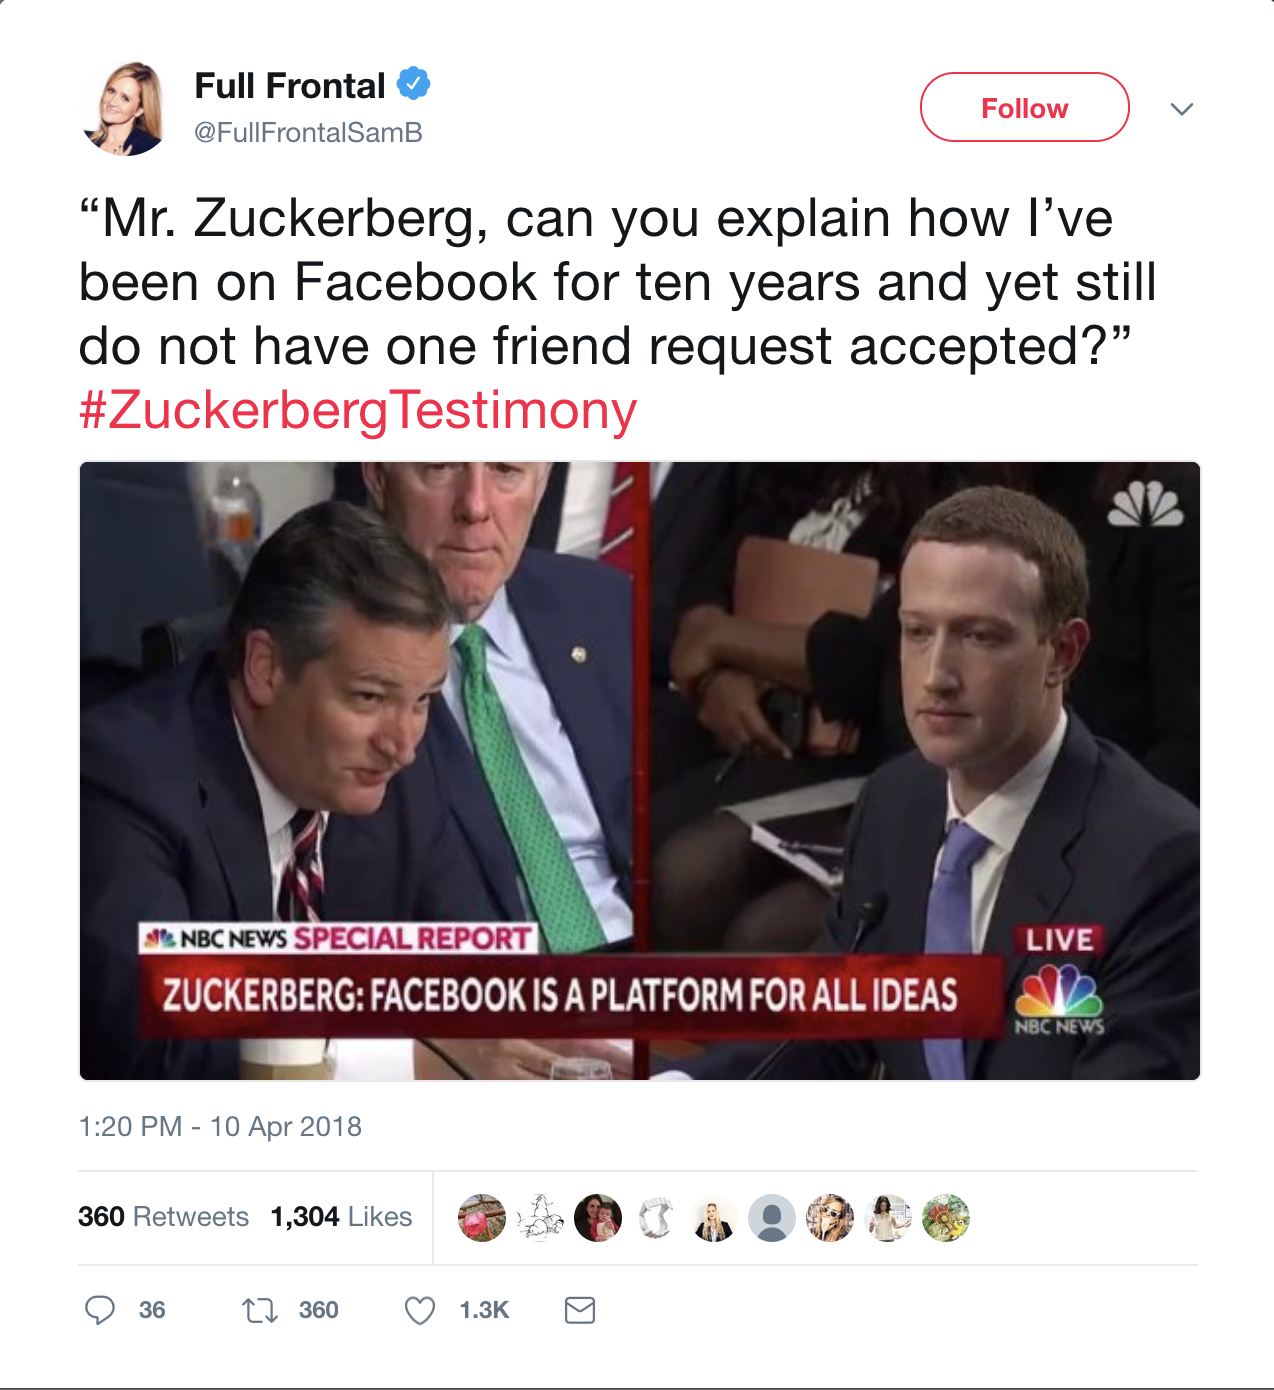 conversation - Full Frontal Full FrontalSamB "Mr. Zuckerberg, can you explain how I've been on Facebook for ten years and yet still do not have one friend request accepted?" Testimony Live Nbc News Special Report Zuckerberg Facebook Is A Platform For All 